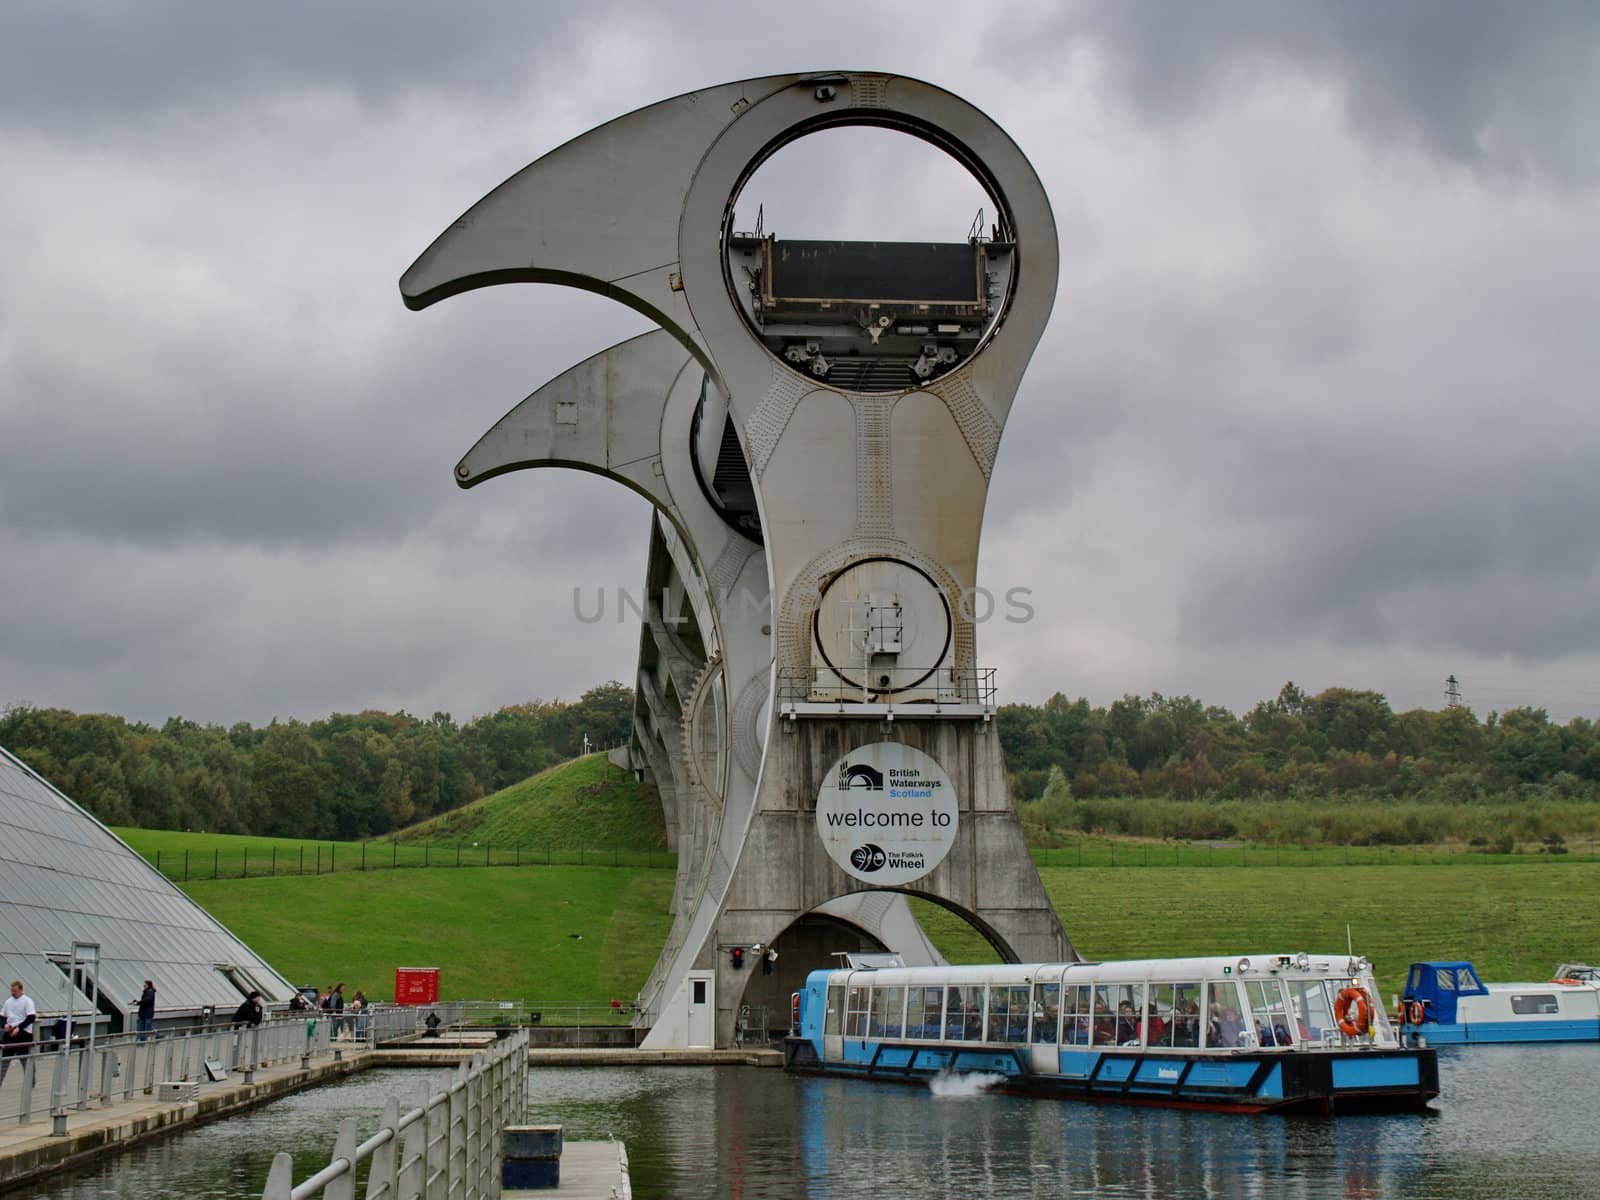 FALKIRK - OCTOBER 18:View of the Falkirk Wheel on October 18, 2010 in Falkirk, Scotland. The Falkirk Wheel is a rotating boat lift located in Scotland, UK, connecting the Forth and Clyde Canal with the Union Canal, opened in 2002.